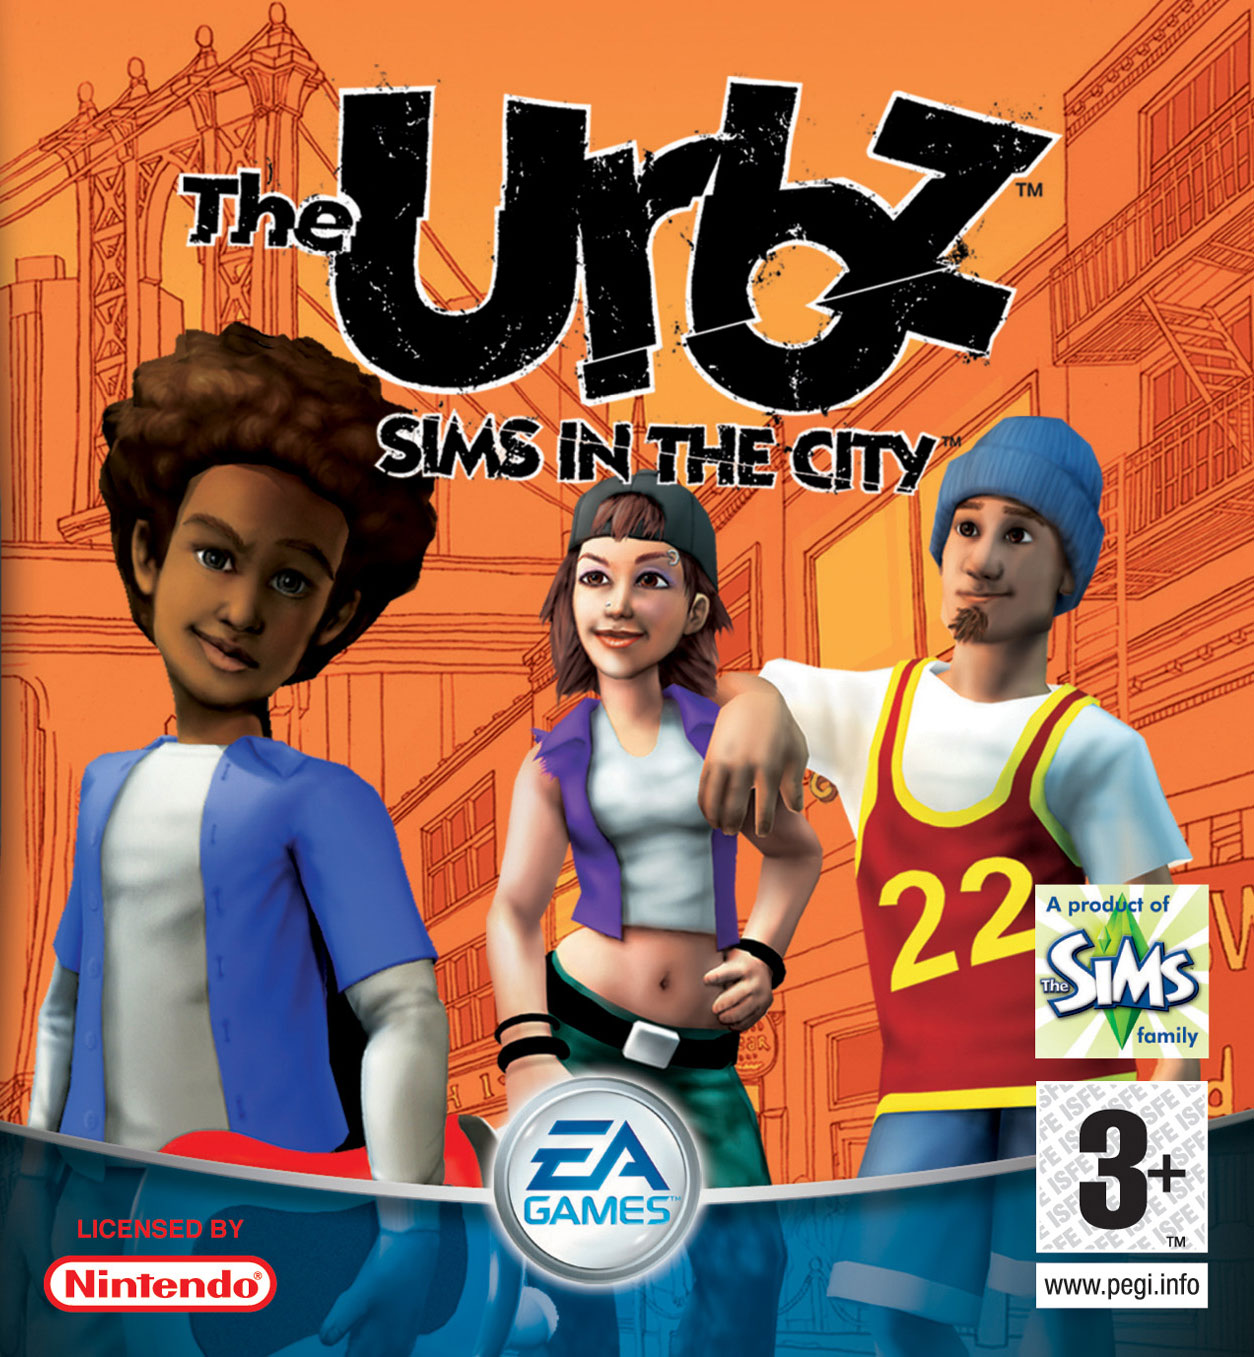 les urbz les sims in the city nds